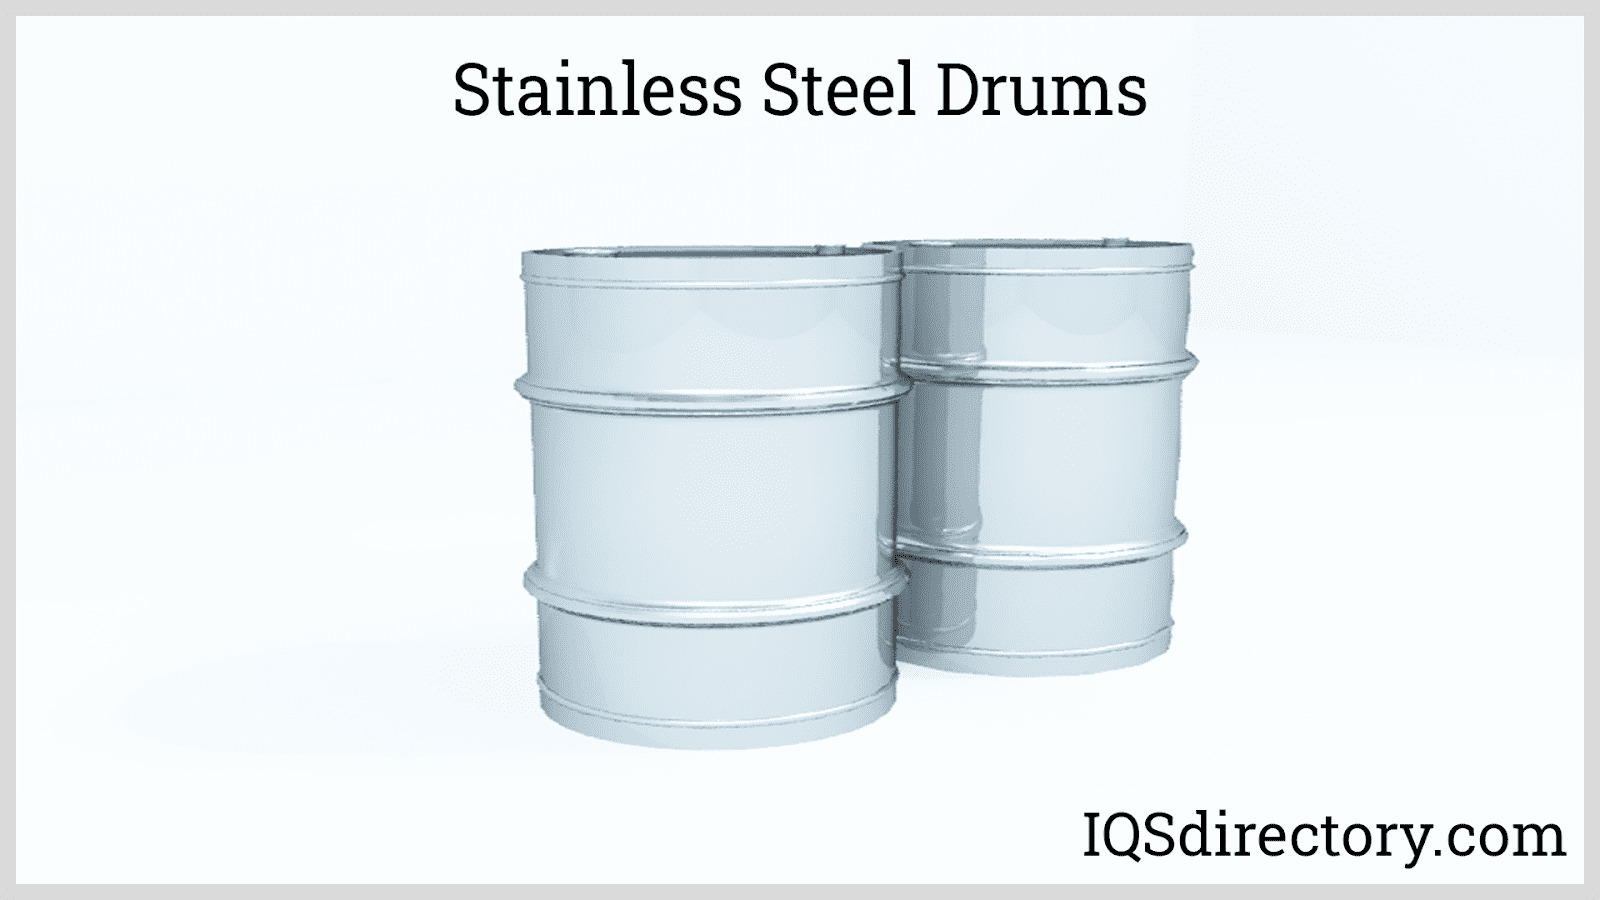 https://www.iqsdirectory.com/articles/55-gallon-drum/stainless-steel-drums.jpg